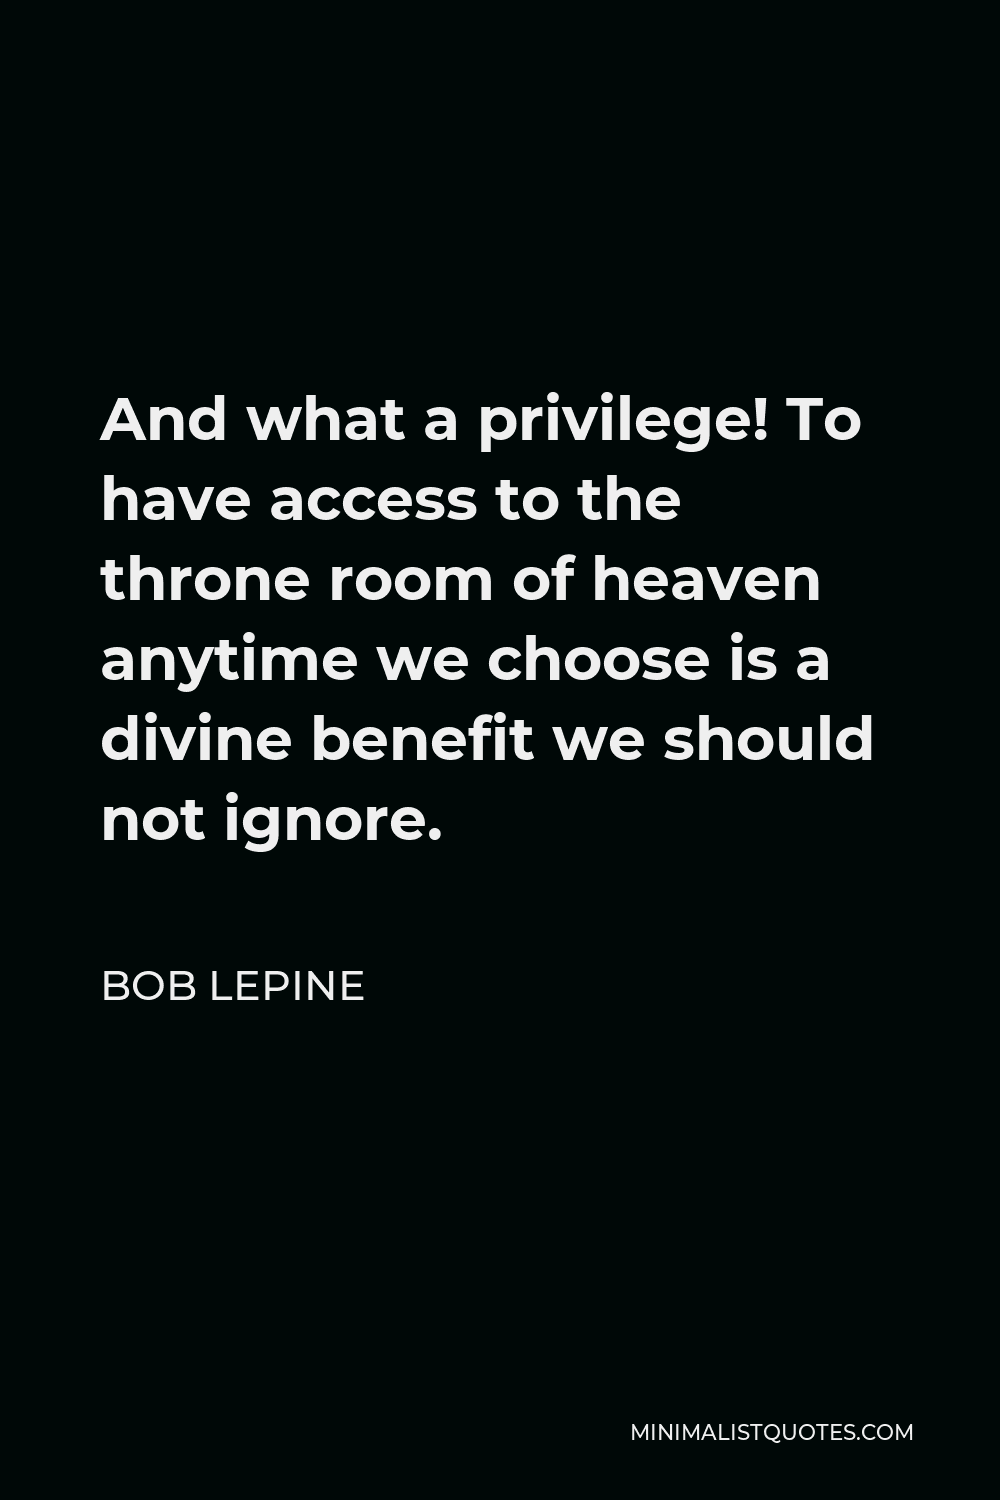 Bob Lepine Quote - And what a privilege! To have access to the throne room of heaven anytime we choose is a divine benefit we should not ignore.